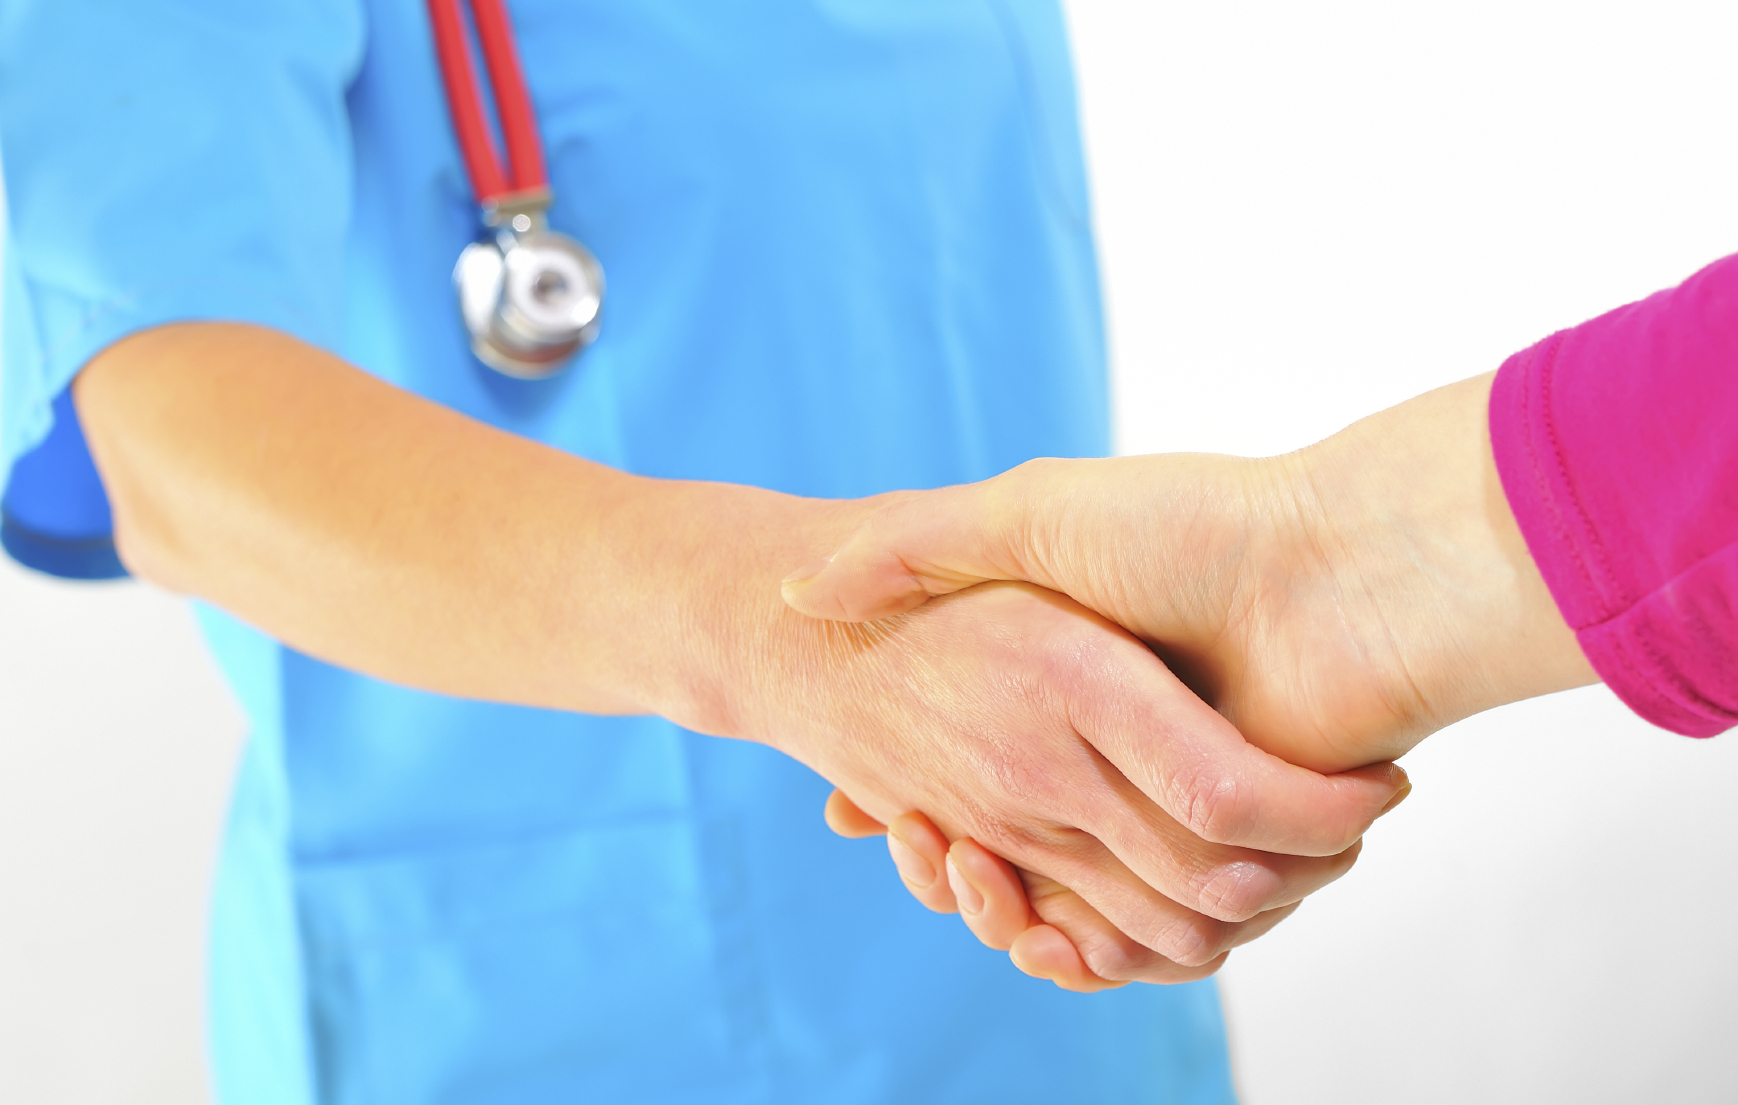 doctors shaking hands, close-up